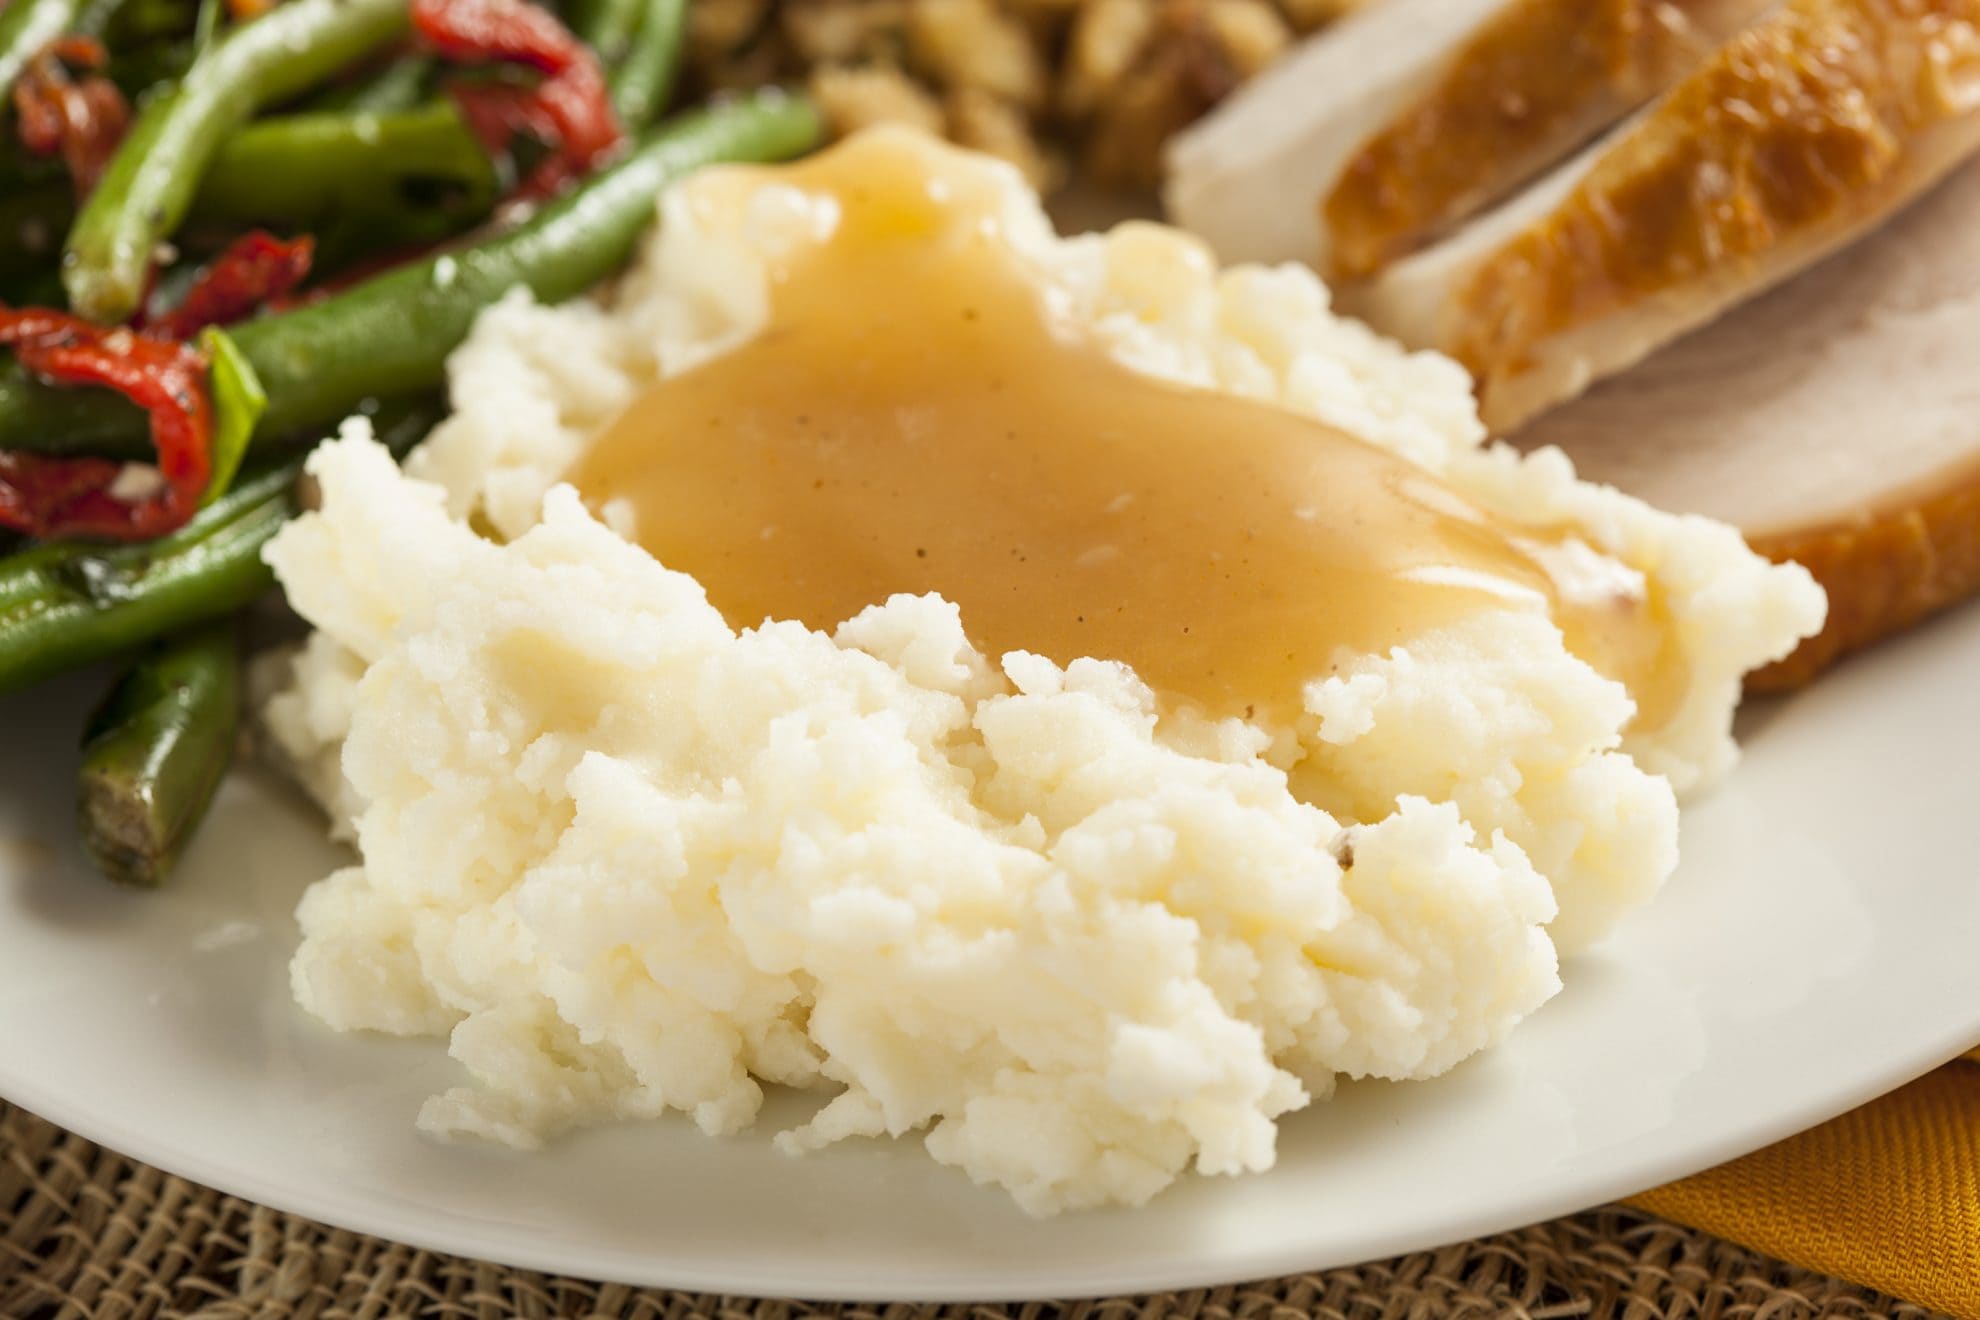 How to Make Gravy from Drippings